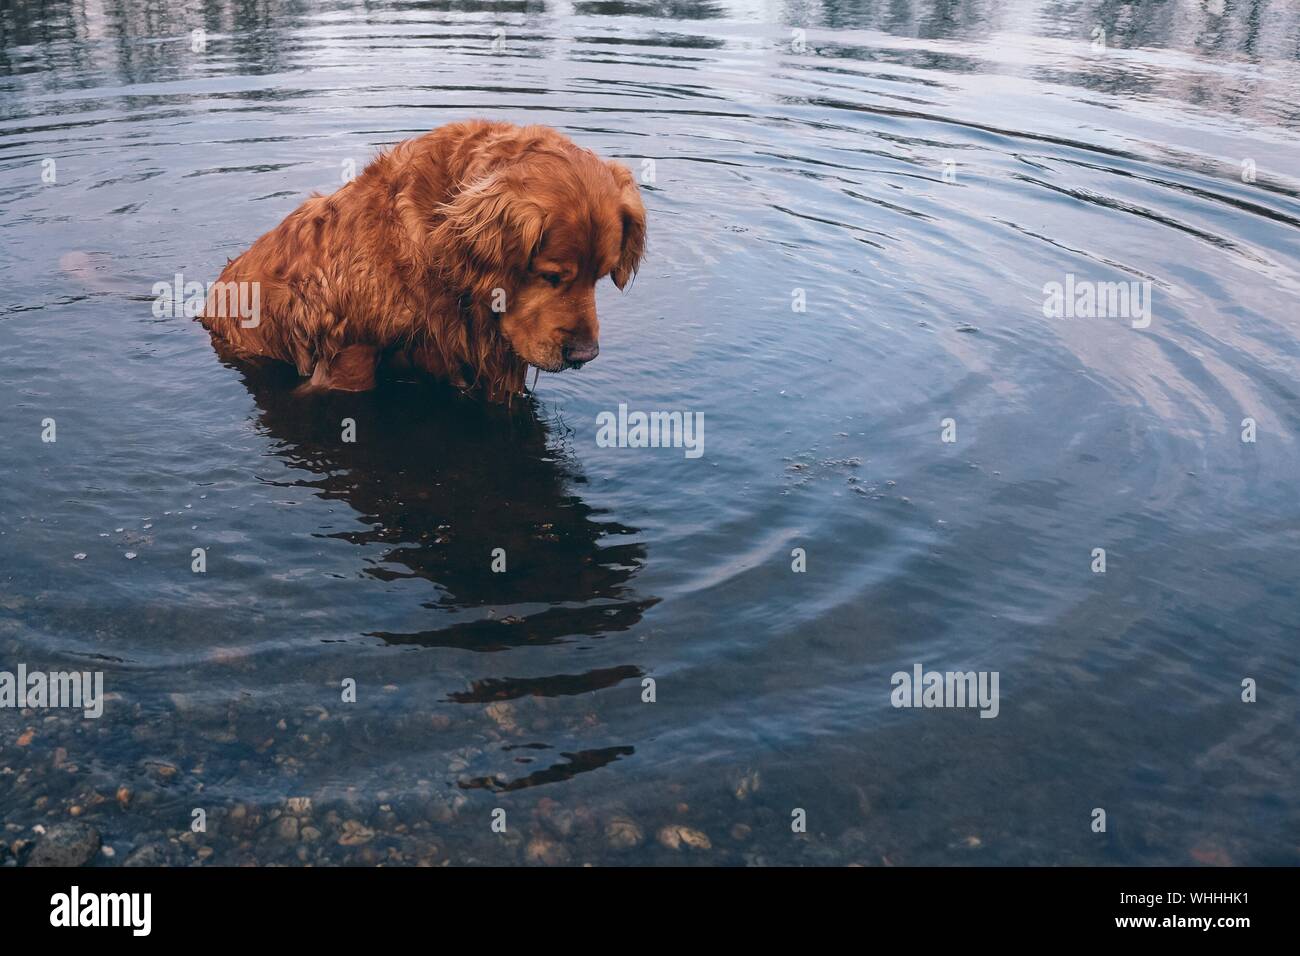 Dog In Shallow Water Stock Photo